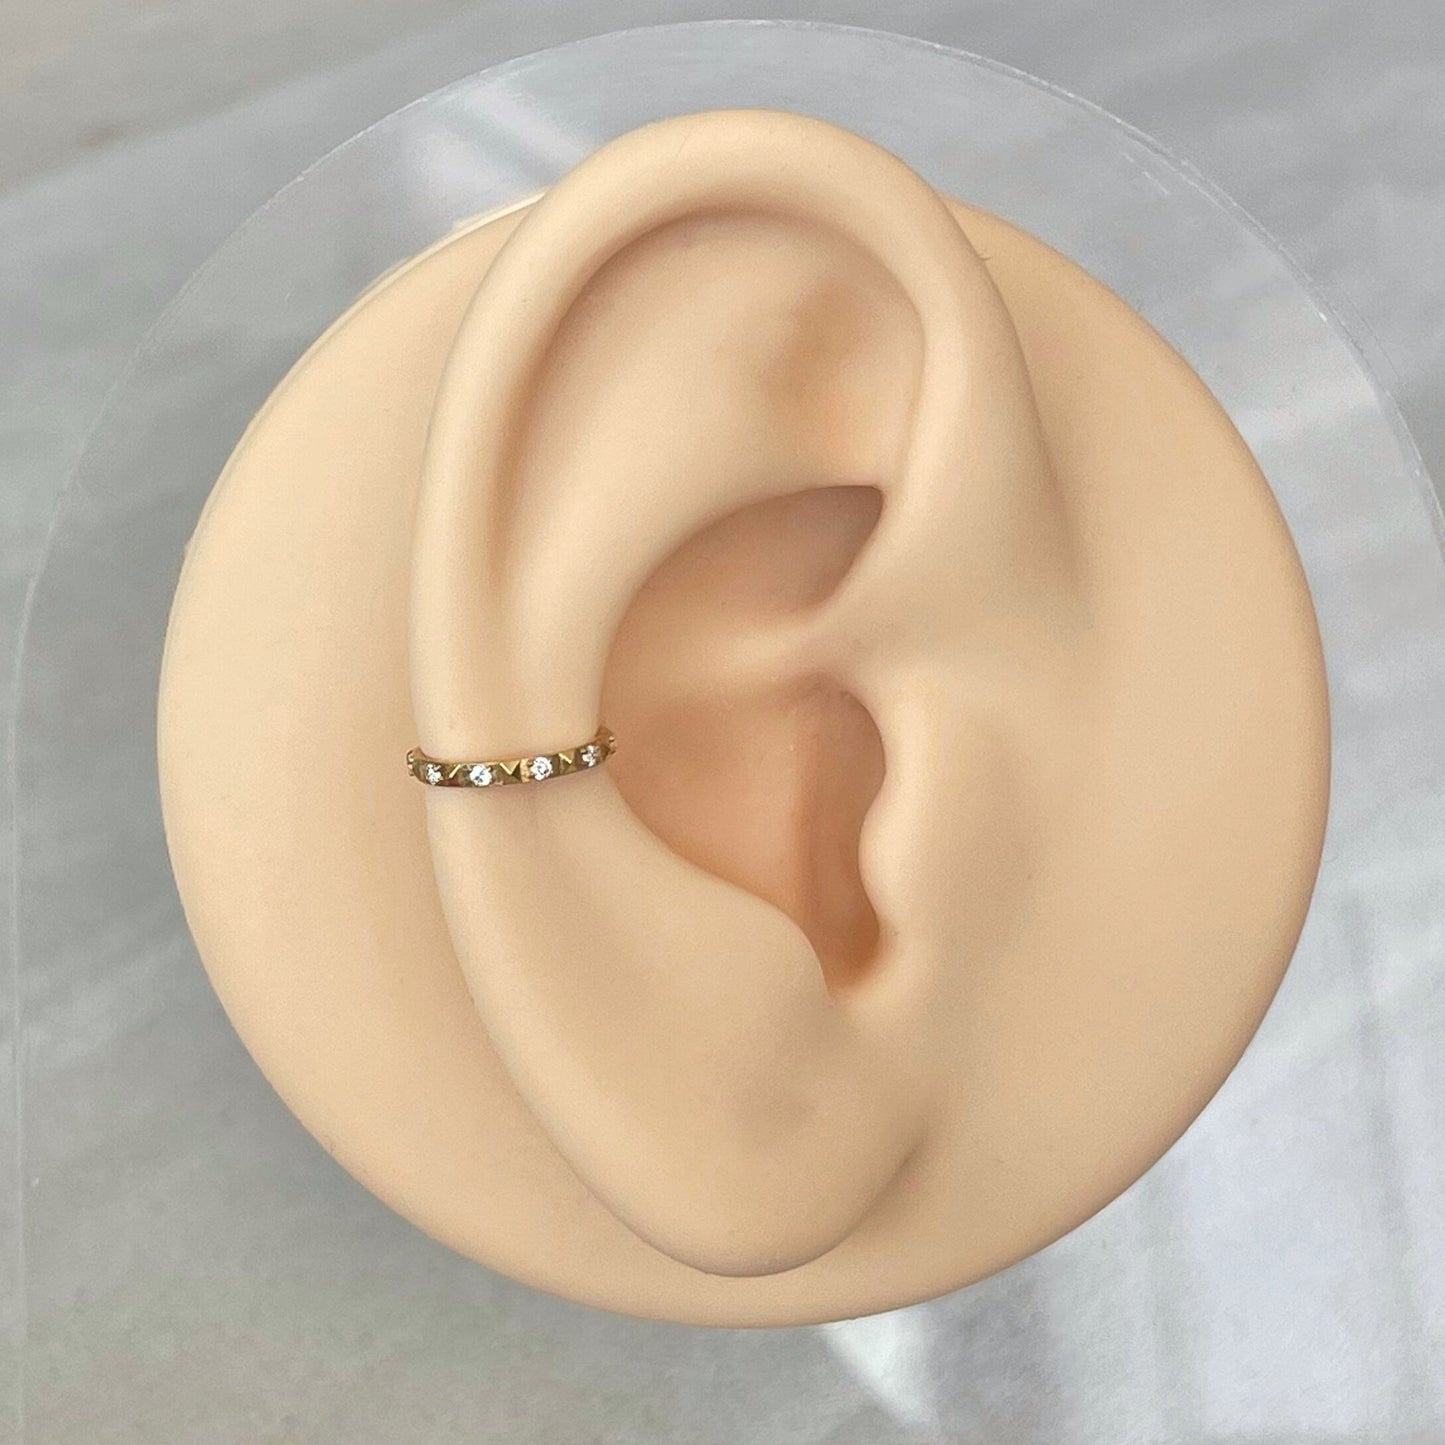 Gold Titanium Daith Earring (16G | 8mm or 10mm | Surgical Steel or Titanium Options | Gold, Silver, Black, or Rose Gold)